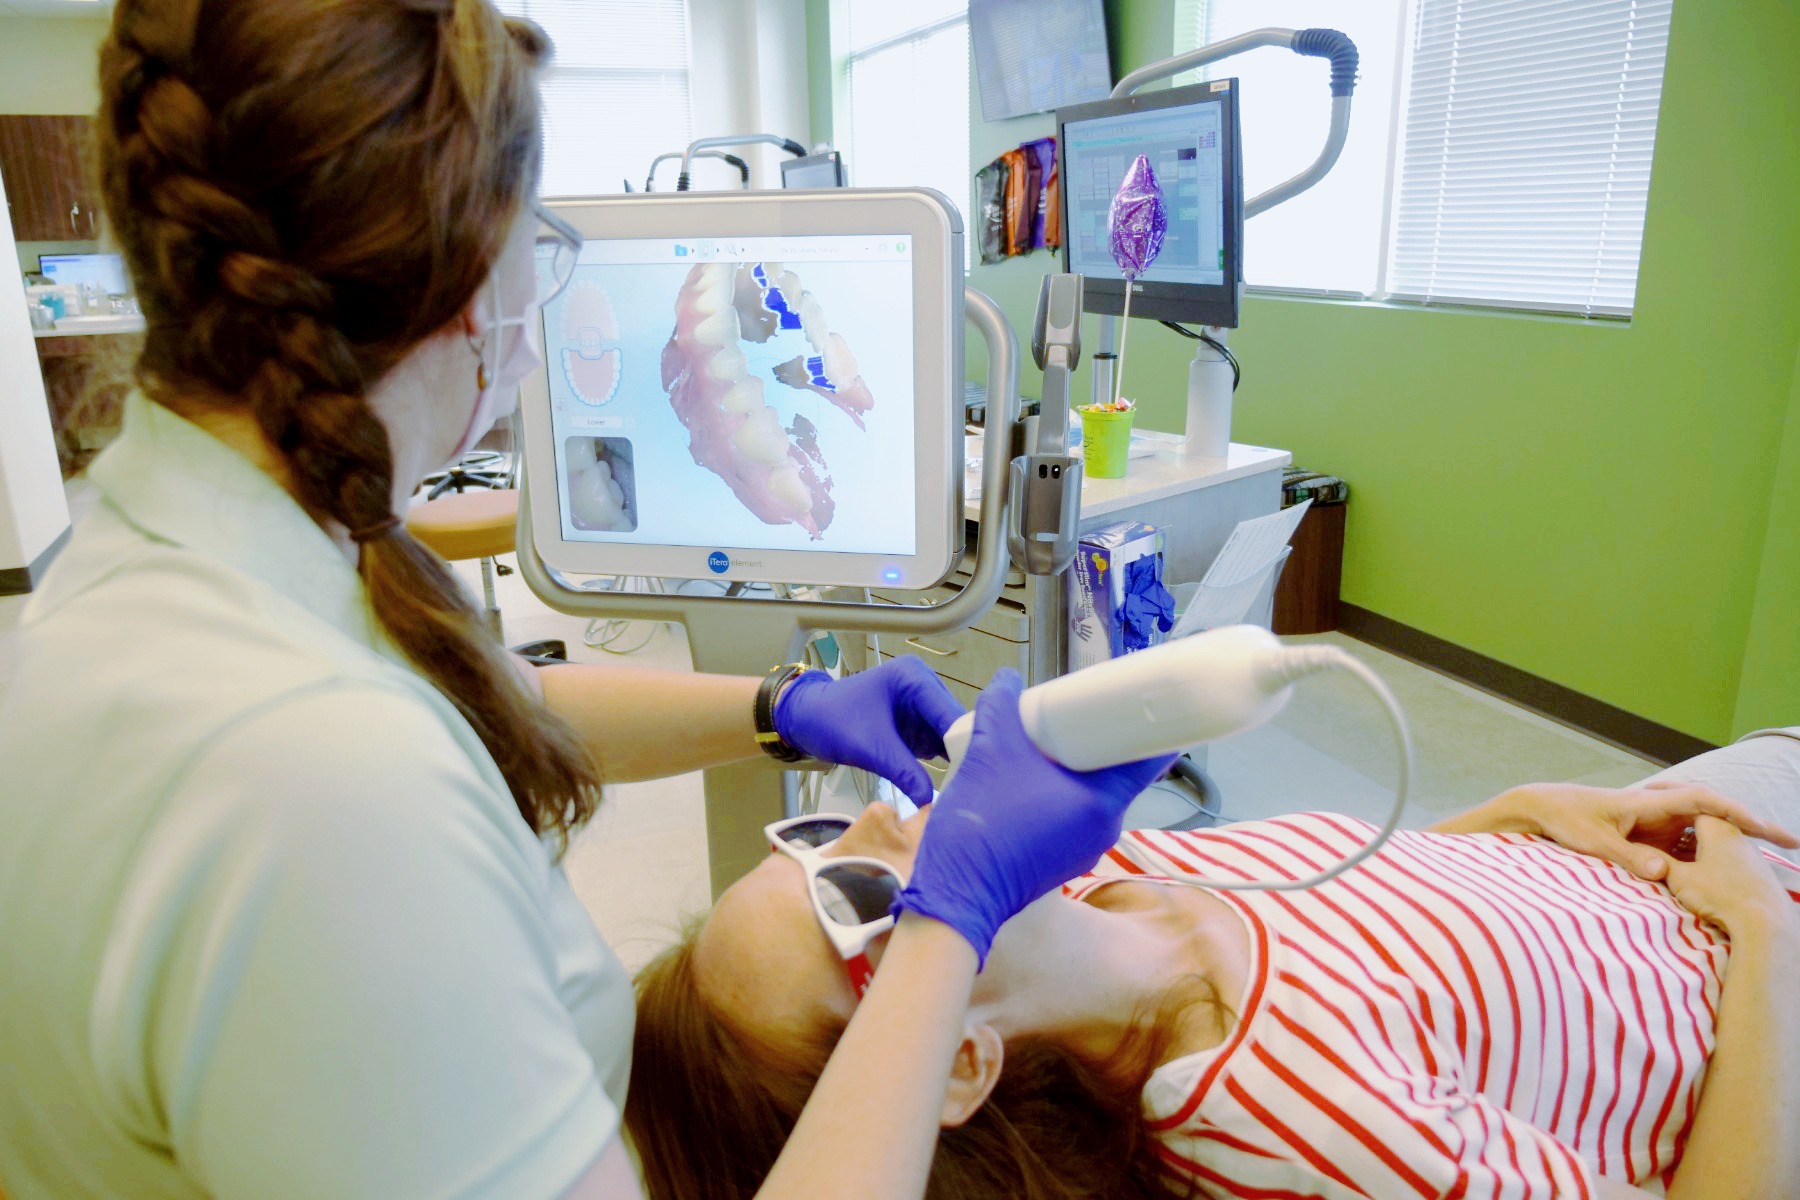 Invisalign Provider Dr da Silveira working with a young patient